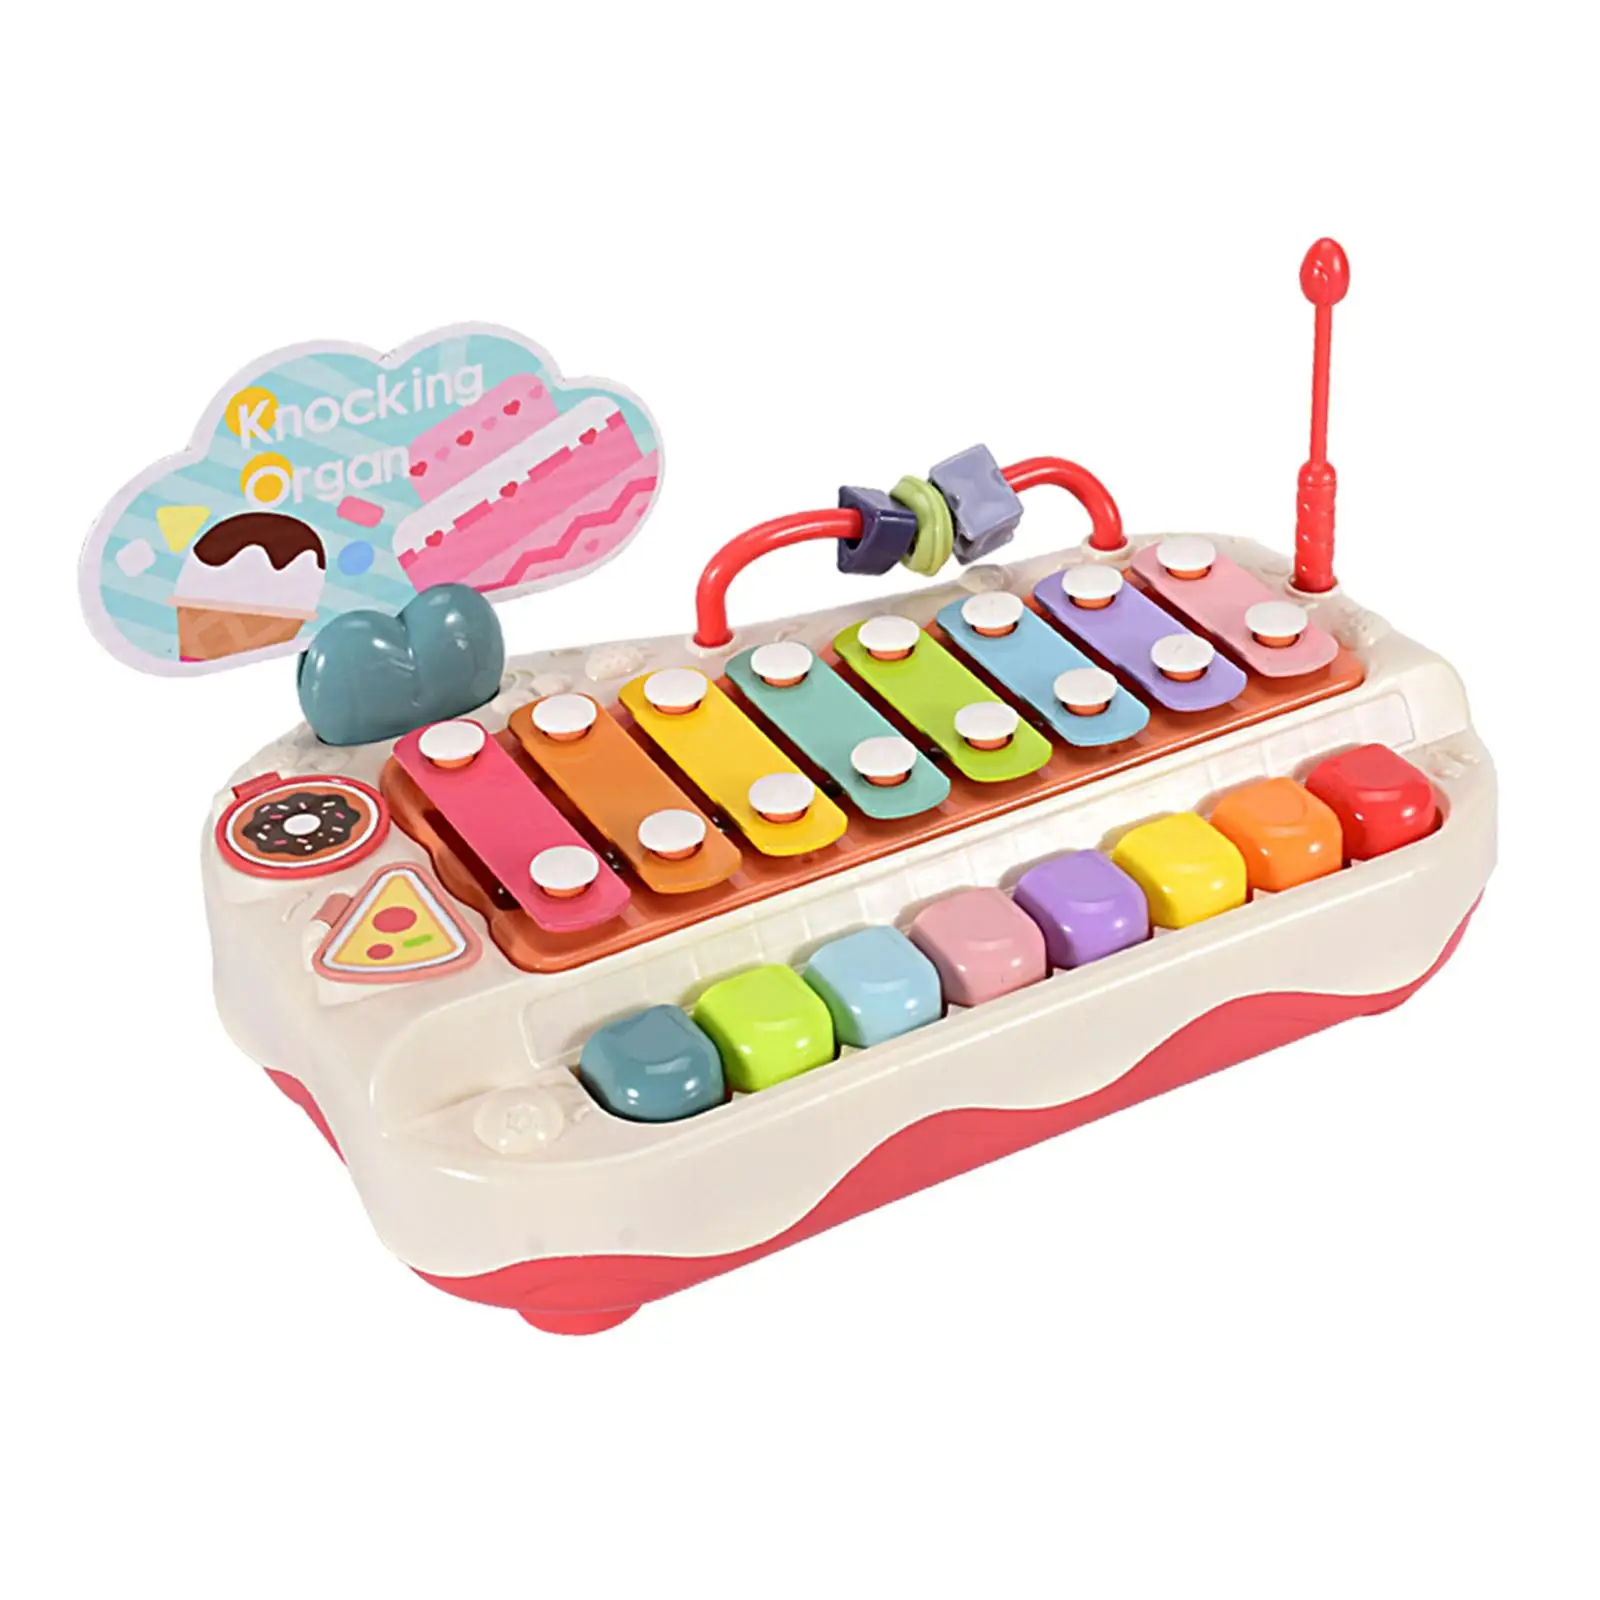 Musical Toy Multicolored Preschool Educational Motor Skills Musical Instrument Toy for Baby Boy Girls Kids 3+ Holiday Gifts